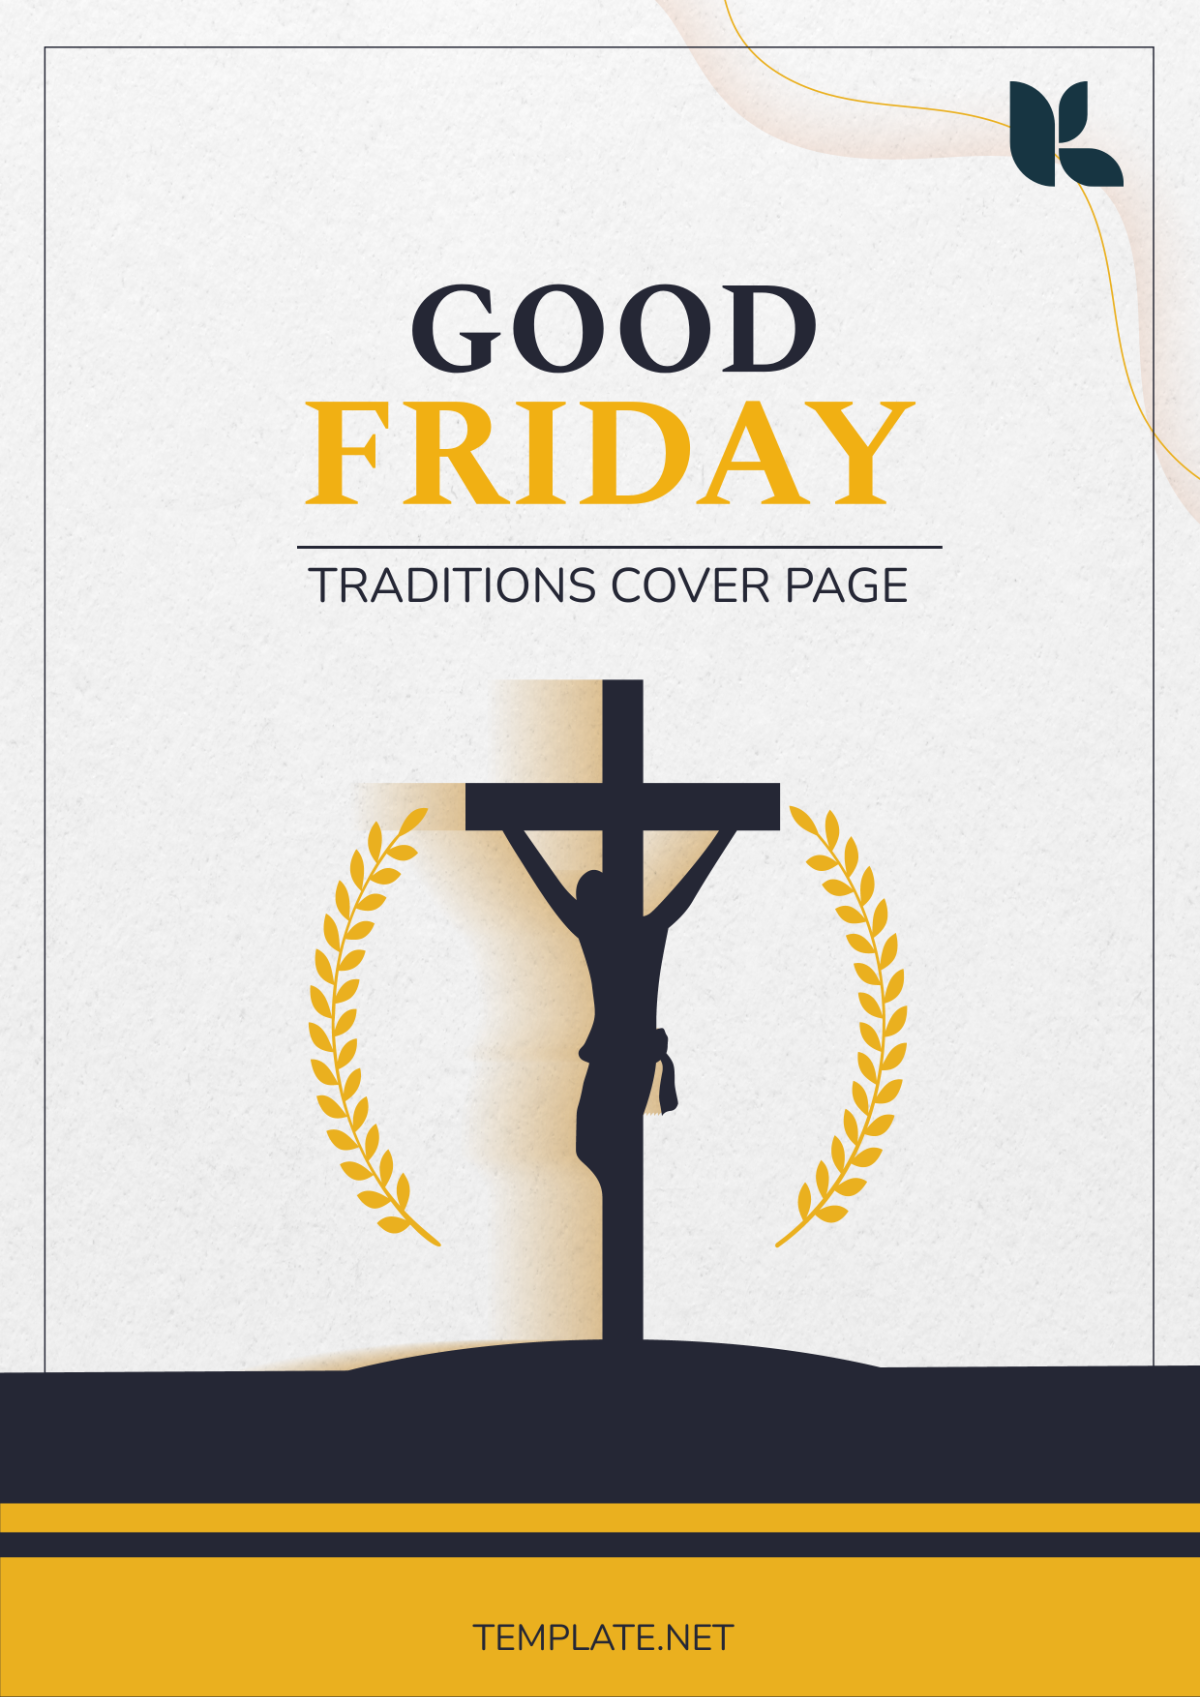 Good Friday Traditions Cover Page